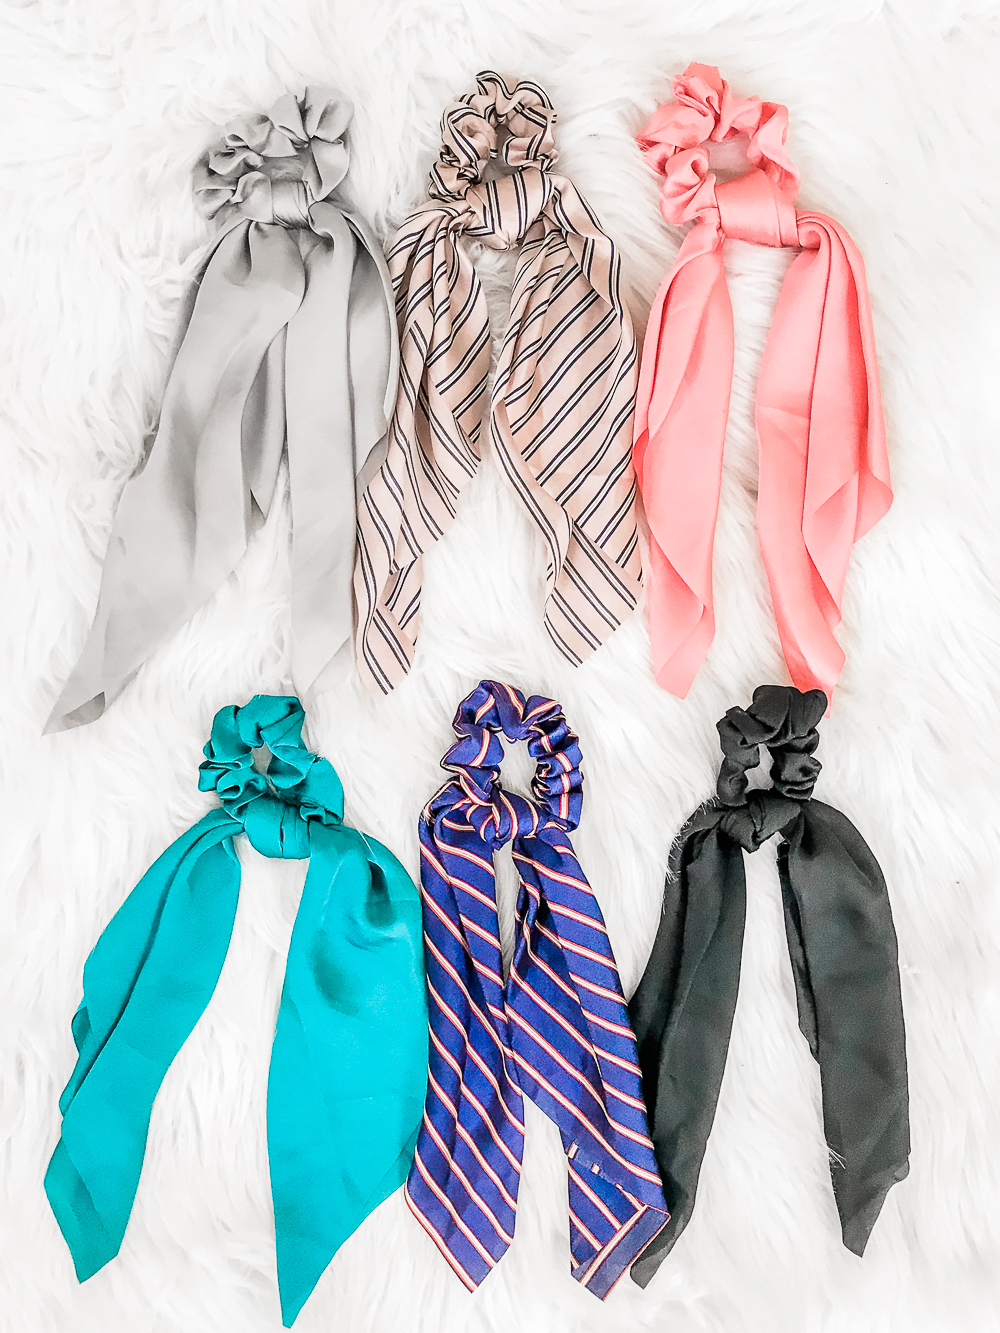 Amazon Silk Hair Scarf Scrunchies Set of 6, Amazon Prime Day Try-On Haul: Top Affordable Fashion Finds